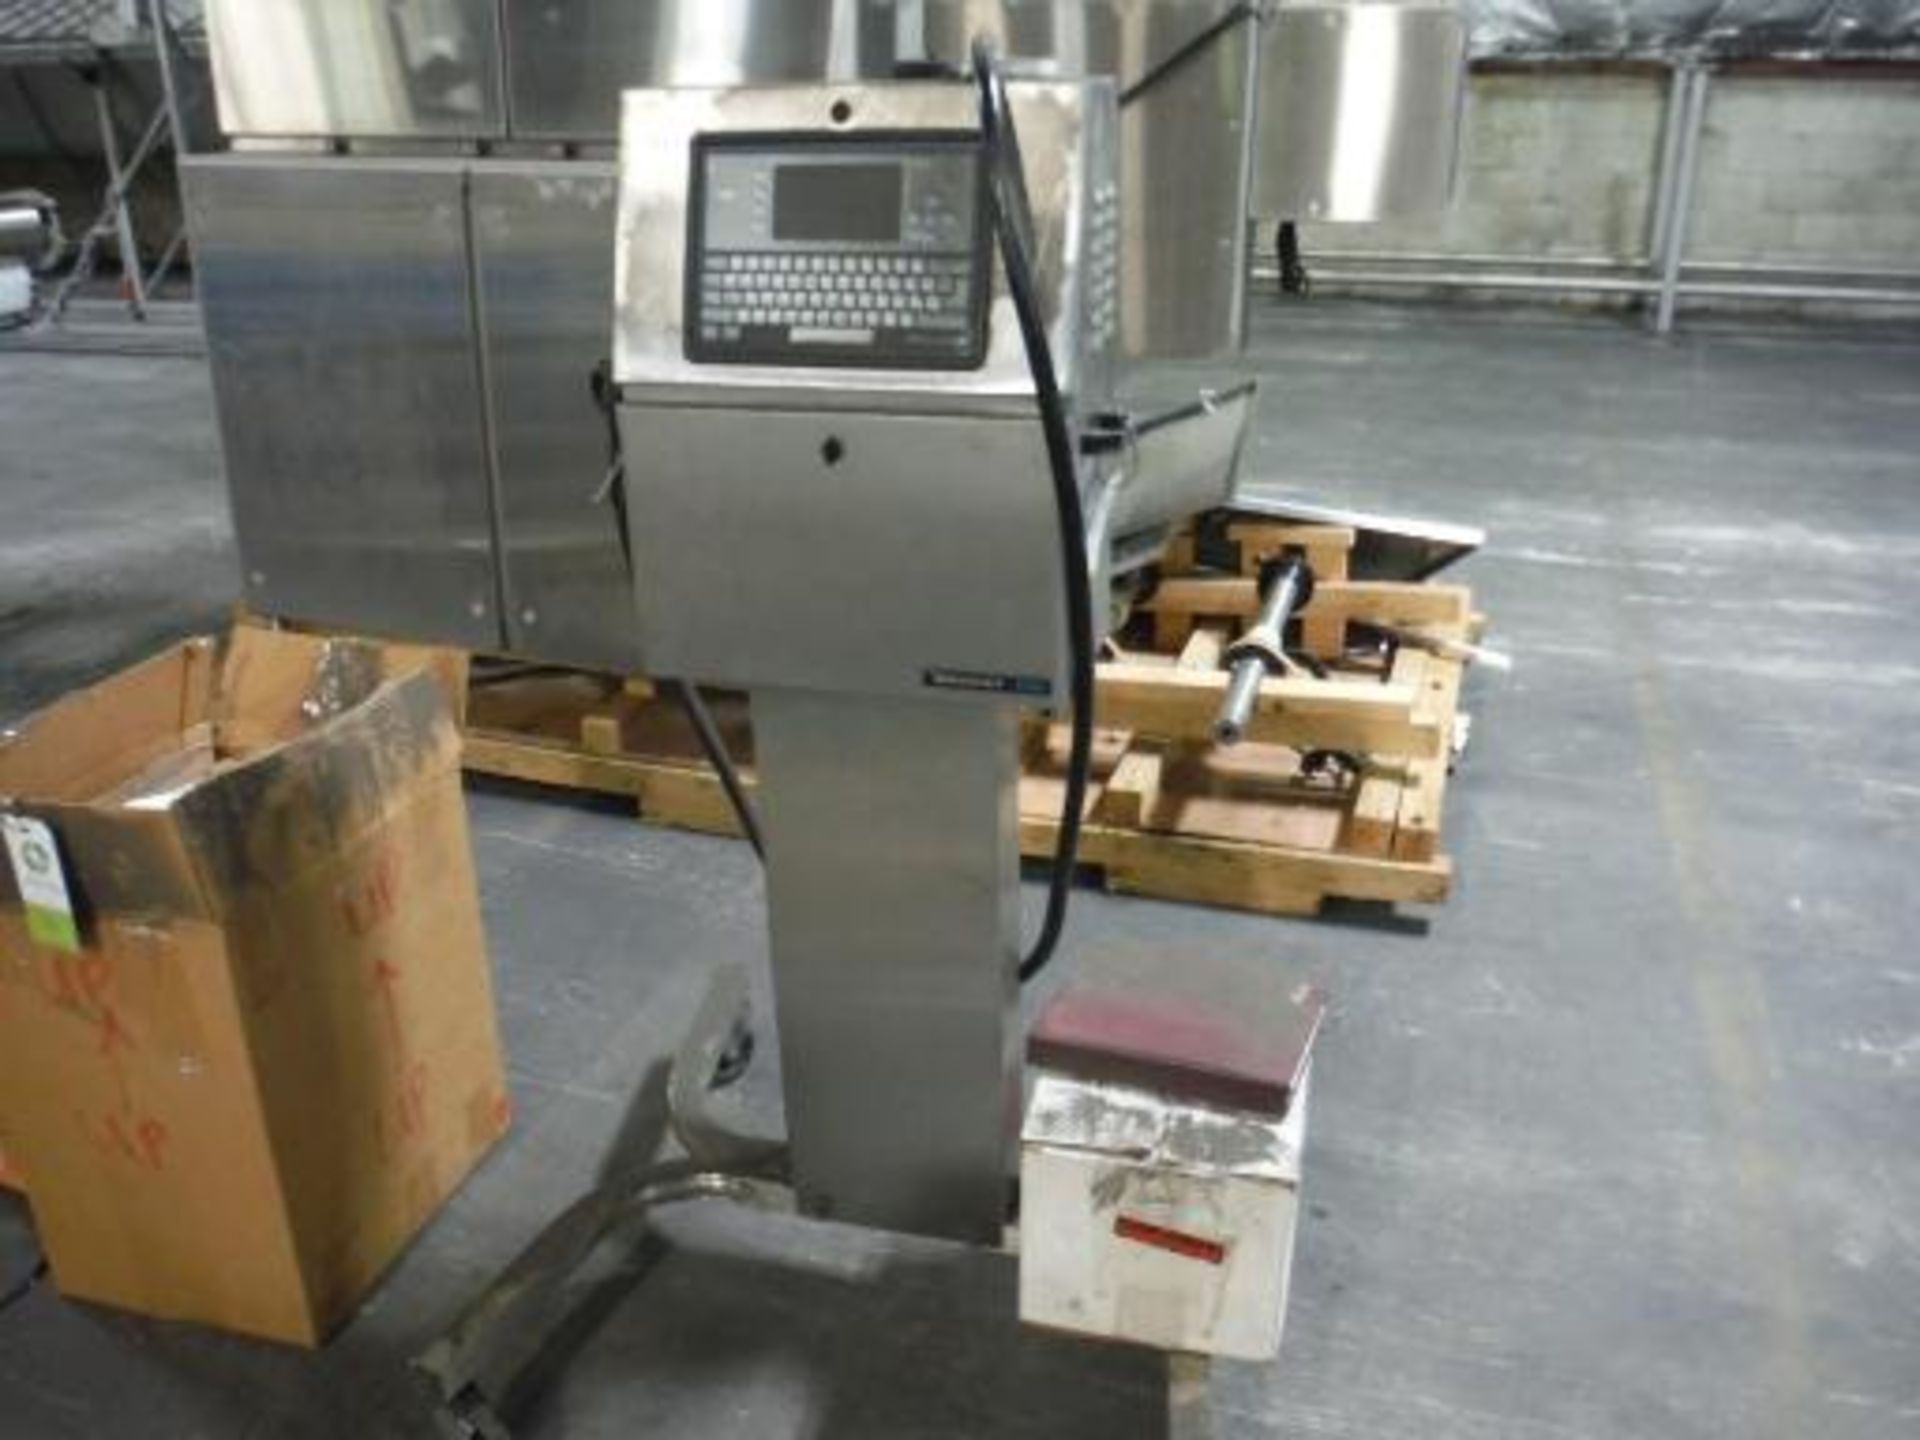 VideoJet ink jet marking machine, Model 43S, SN 378200-01 This item is located in Wisconsin **__ A